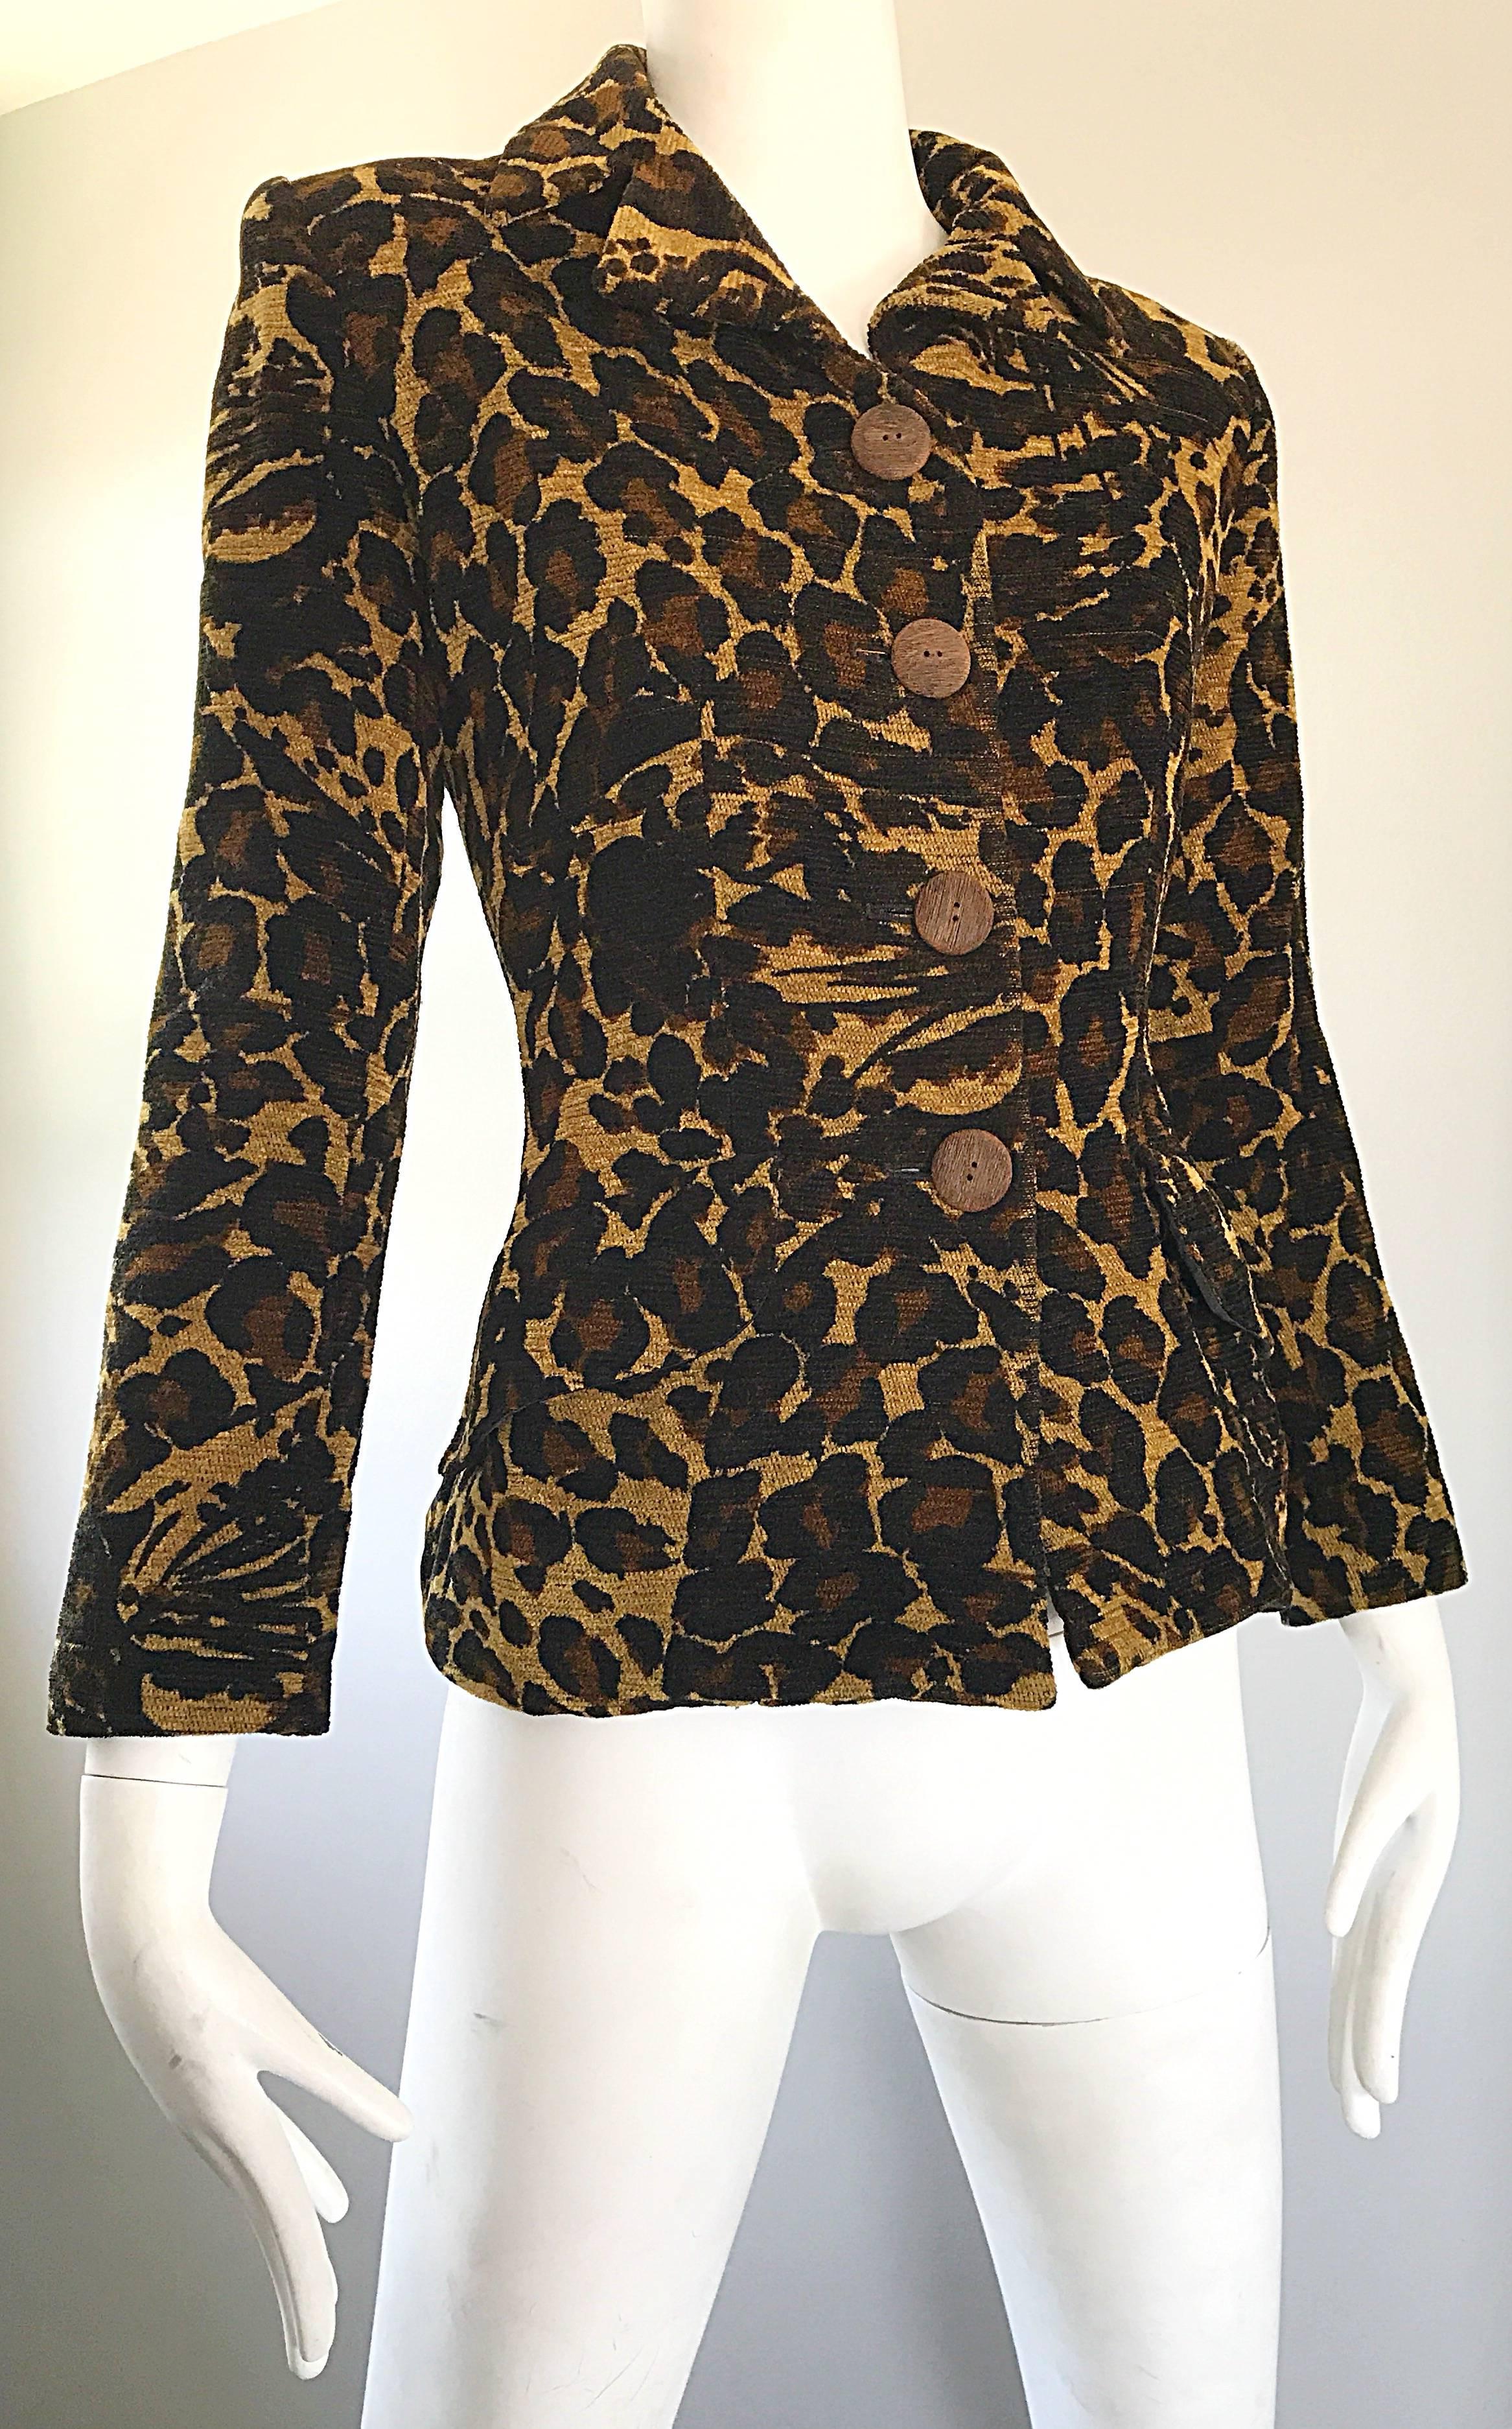 Iconic Yves Saint Laurent 1990s Leopard Print Chenille Vintage 90s Jacket Blazer In Excellent Condition For Sale In San Diego, CA